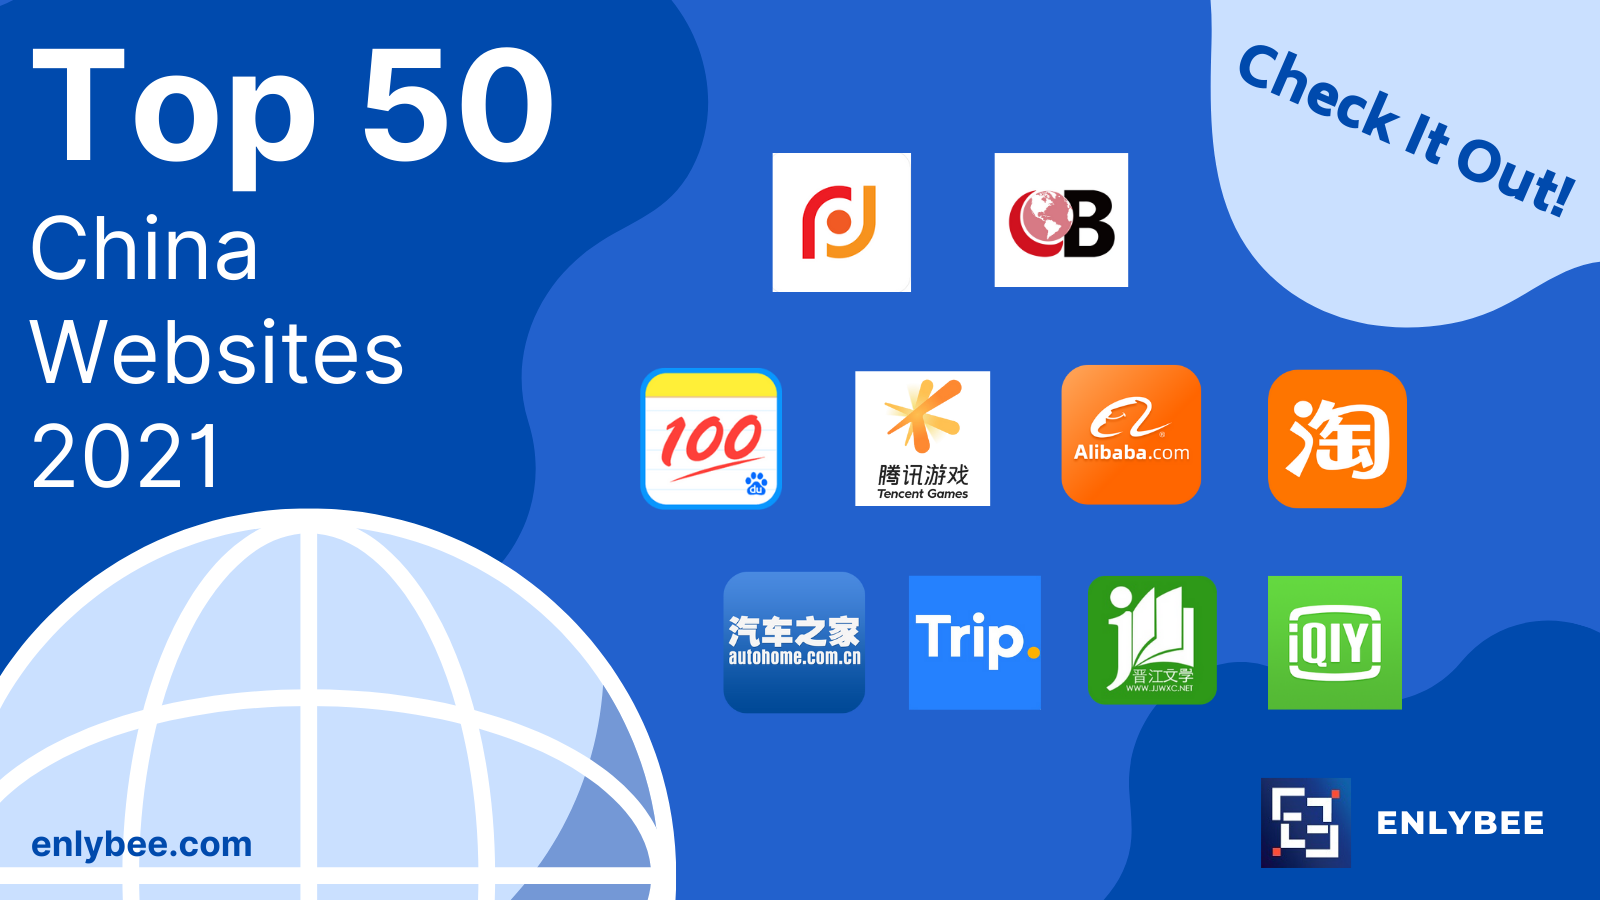 Top 50 Chinese Websites 2021-2022